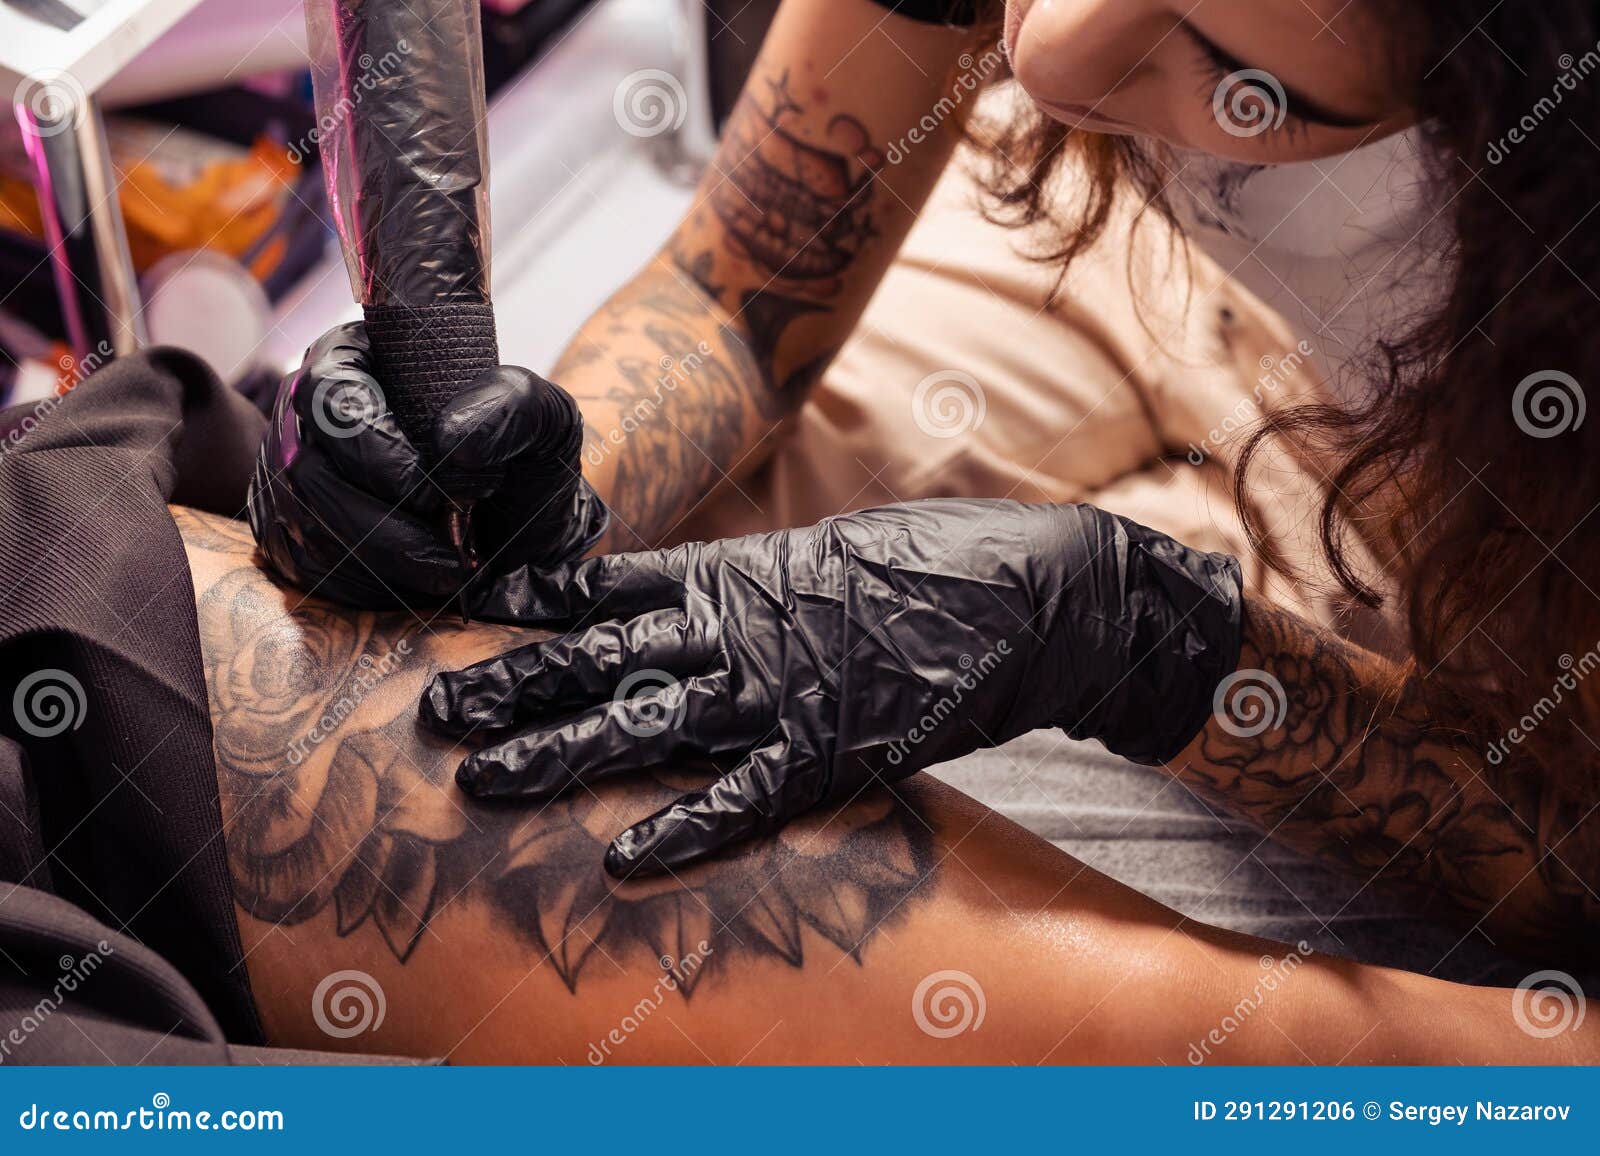 professional tattooist creating black and white flower  on female thigh